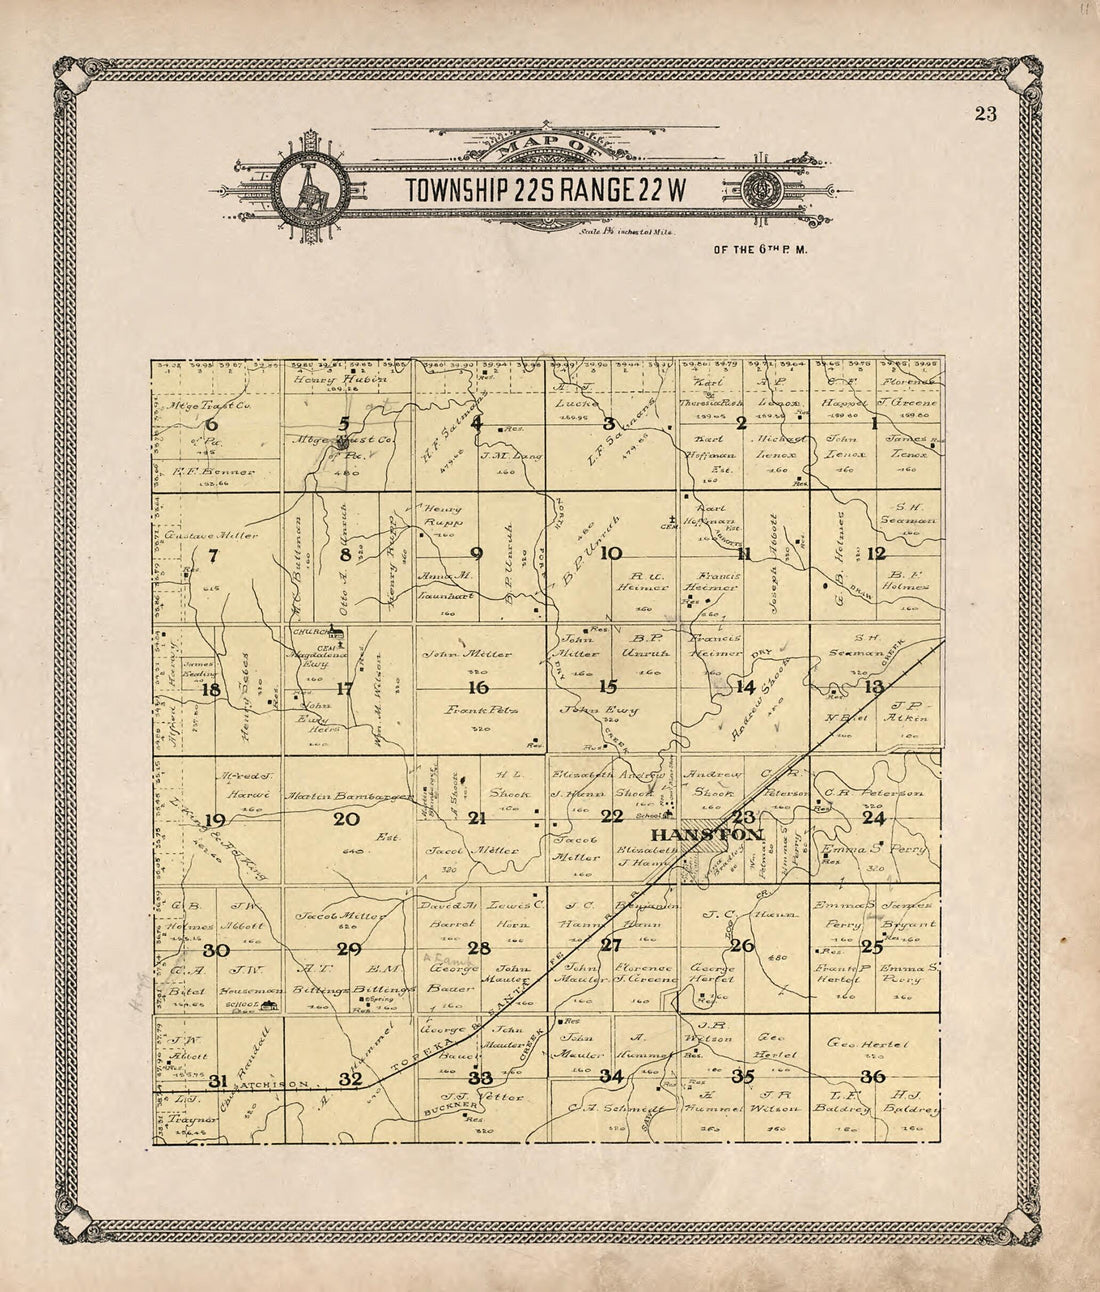 This old map of Map of Township 22 S Range 22 W from Standard Atlas of Hodgeman County, Kansas from 1907 was created by  Geo. A. Ogle &amp; Co in 1907